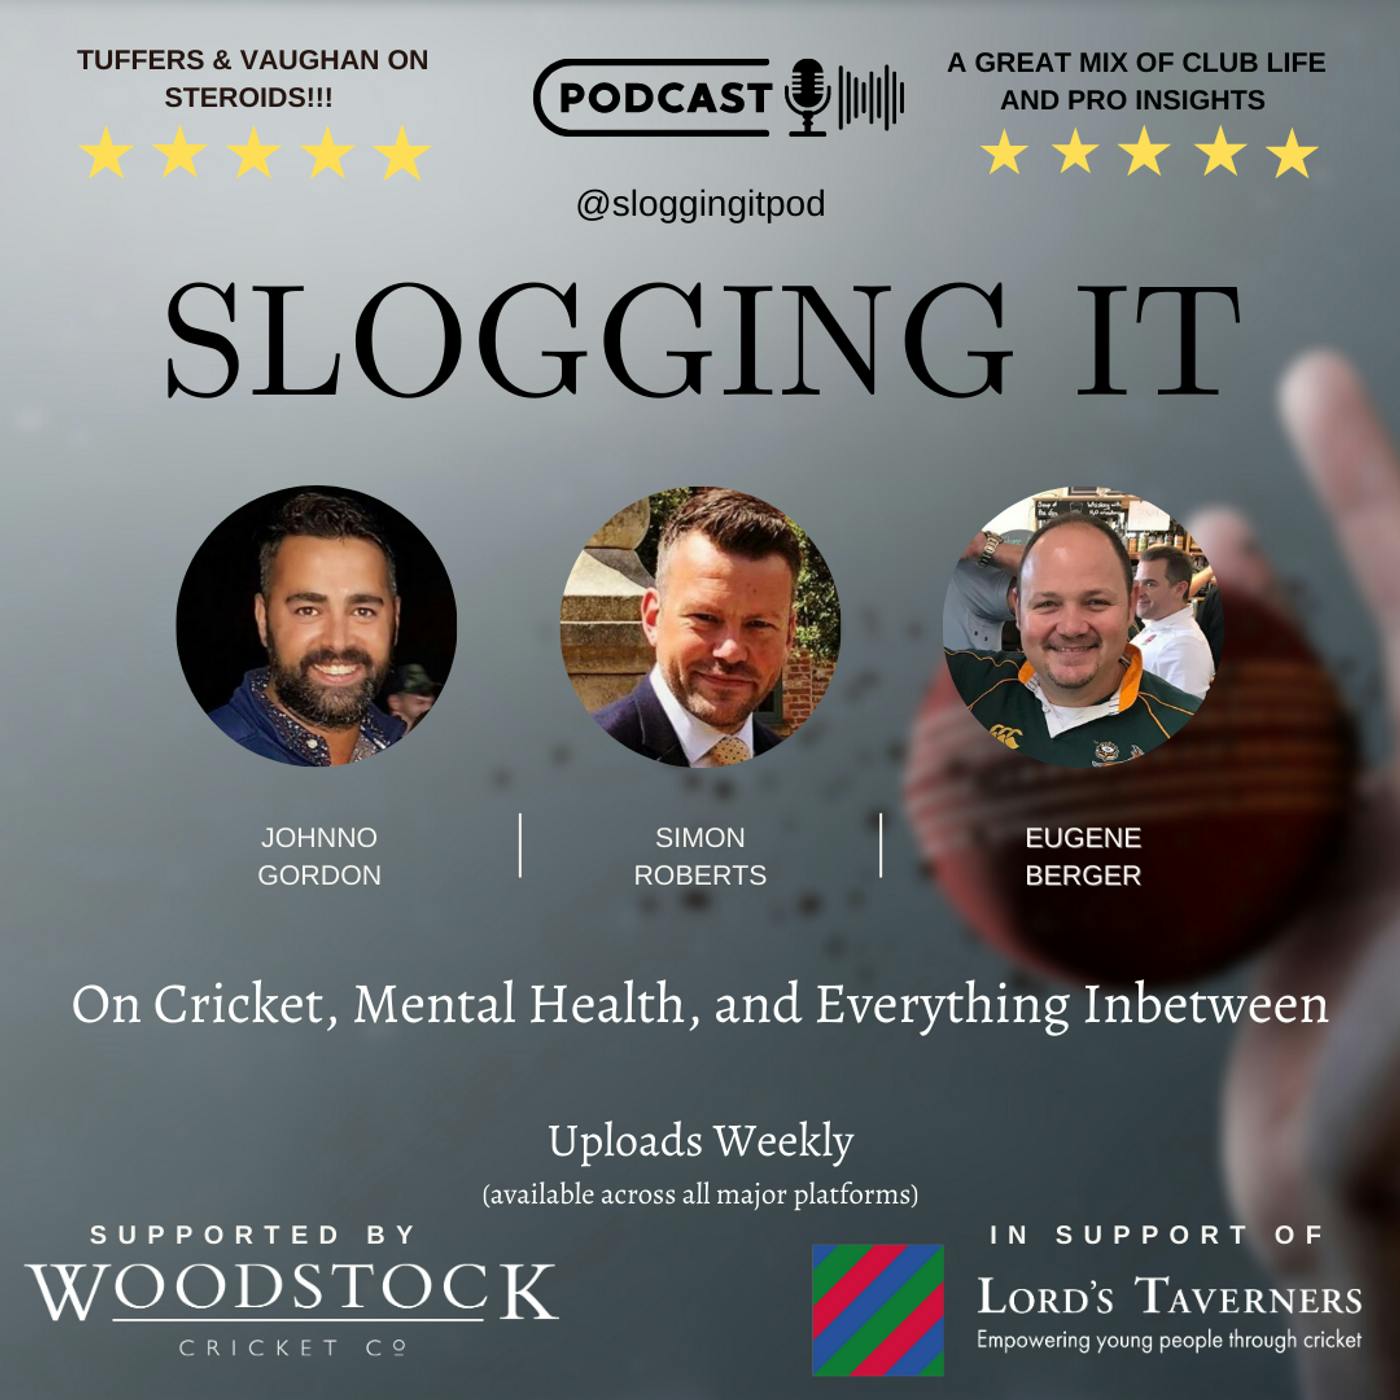 In this week's episode of Slogging It, we discussed the recent T20 series between England and New Zealand, as well as the one-day series between South Africa and Australia.